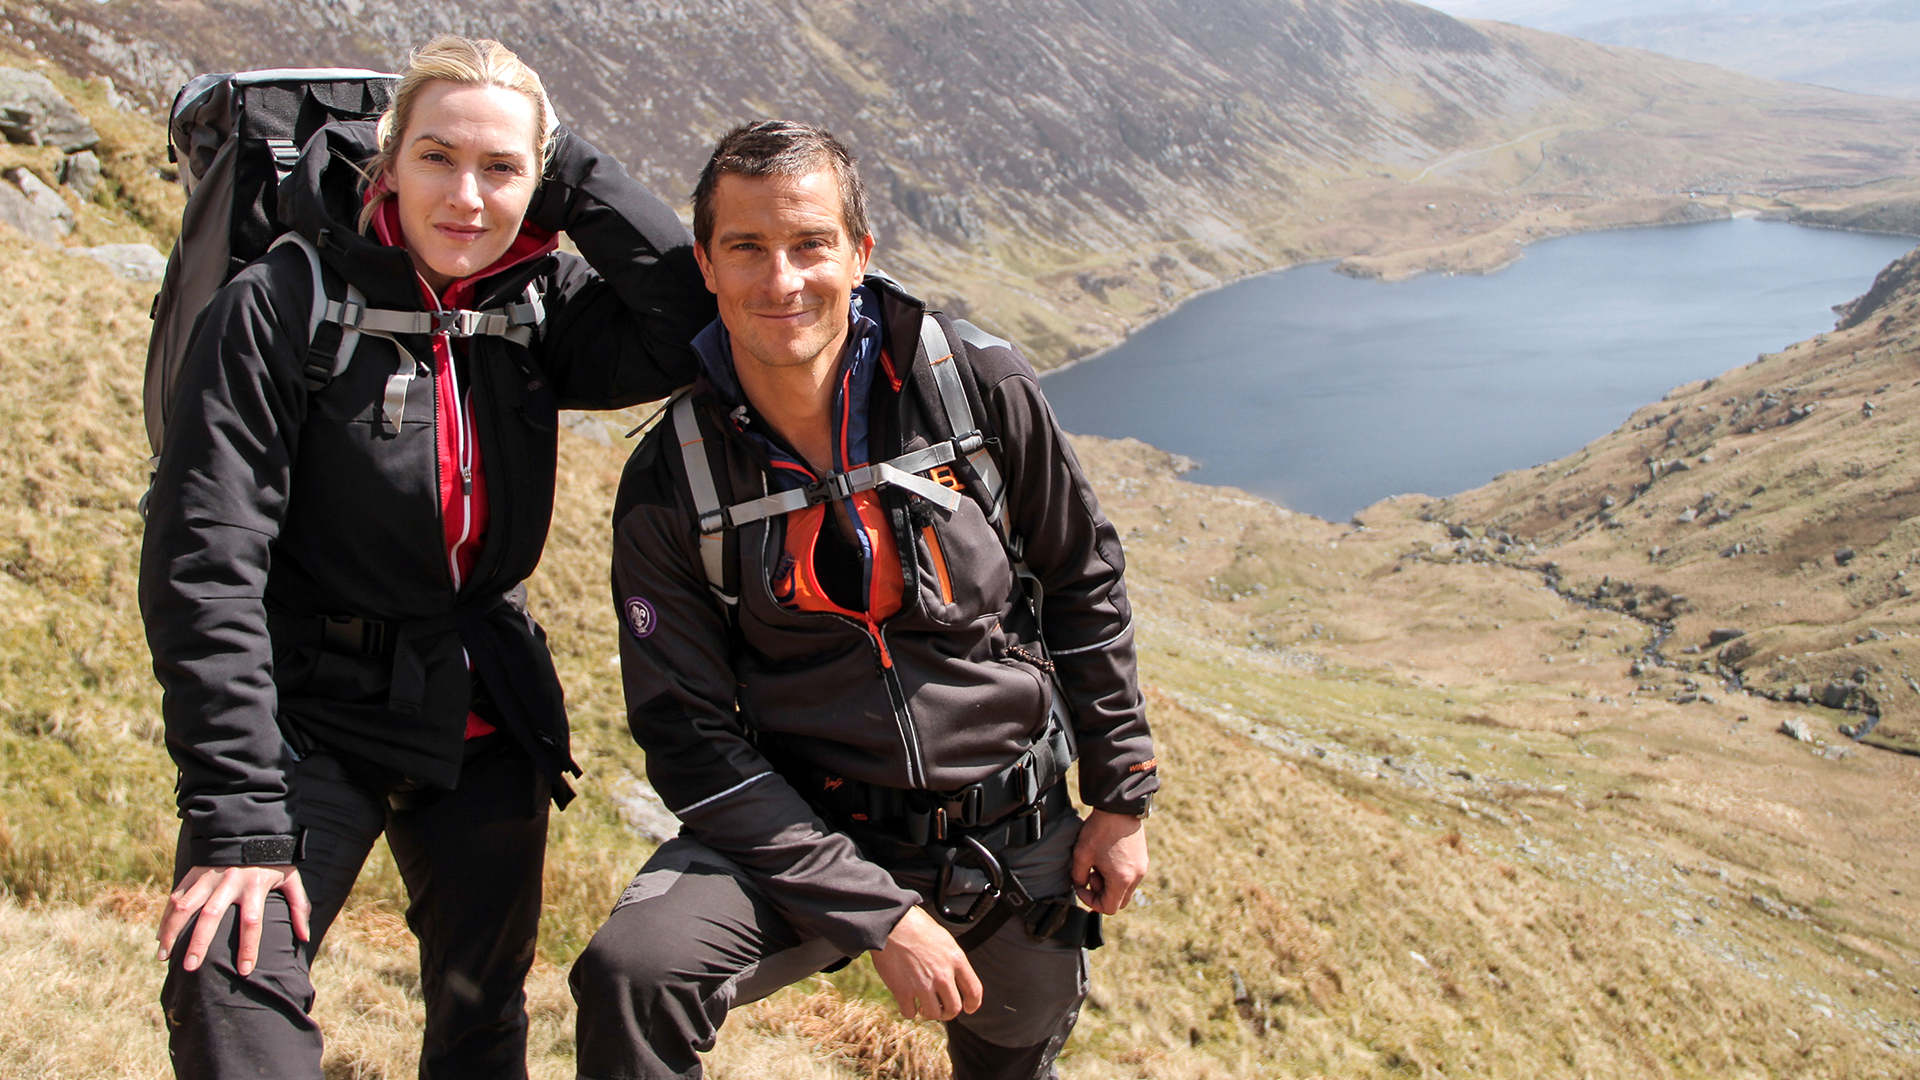 Running Wild With Bear Grylls Wallpapers